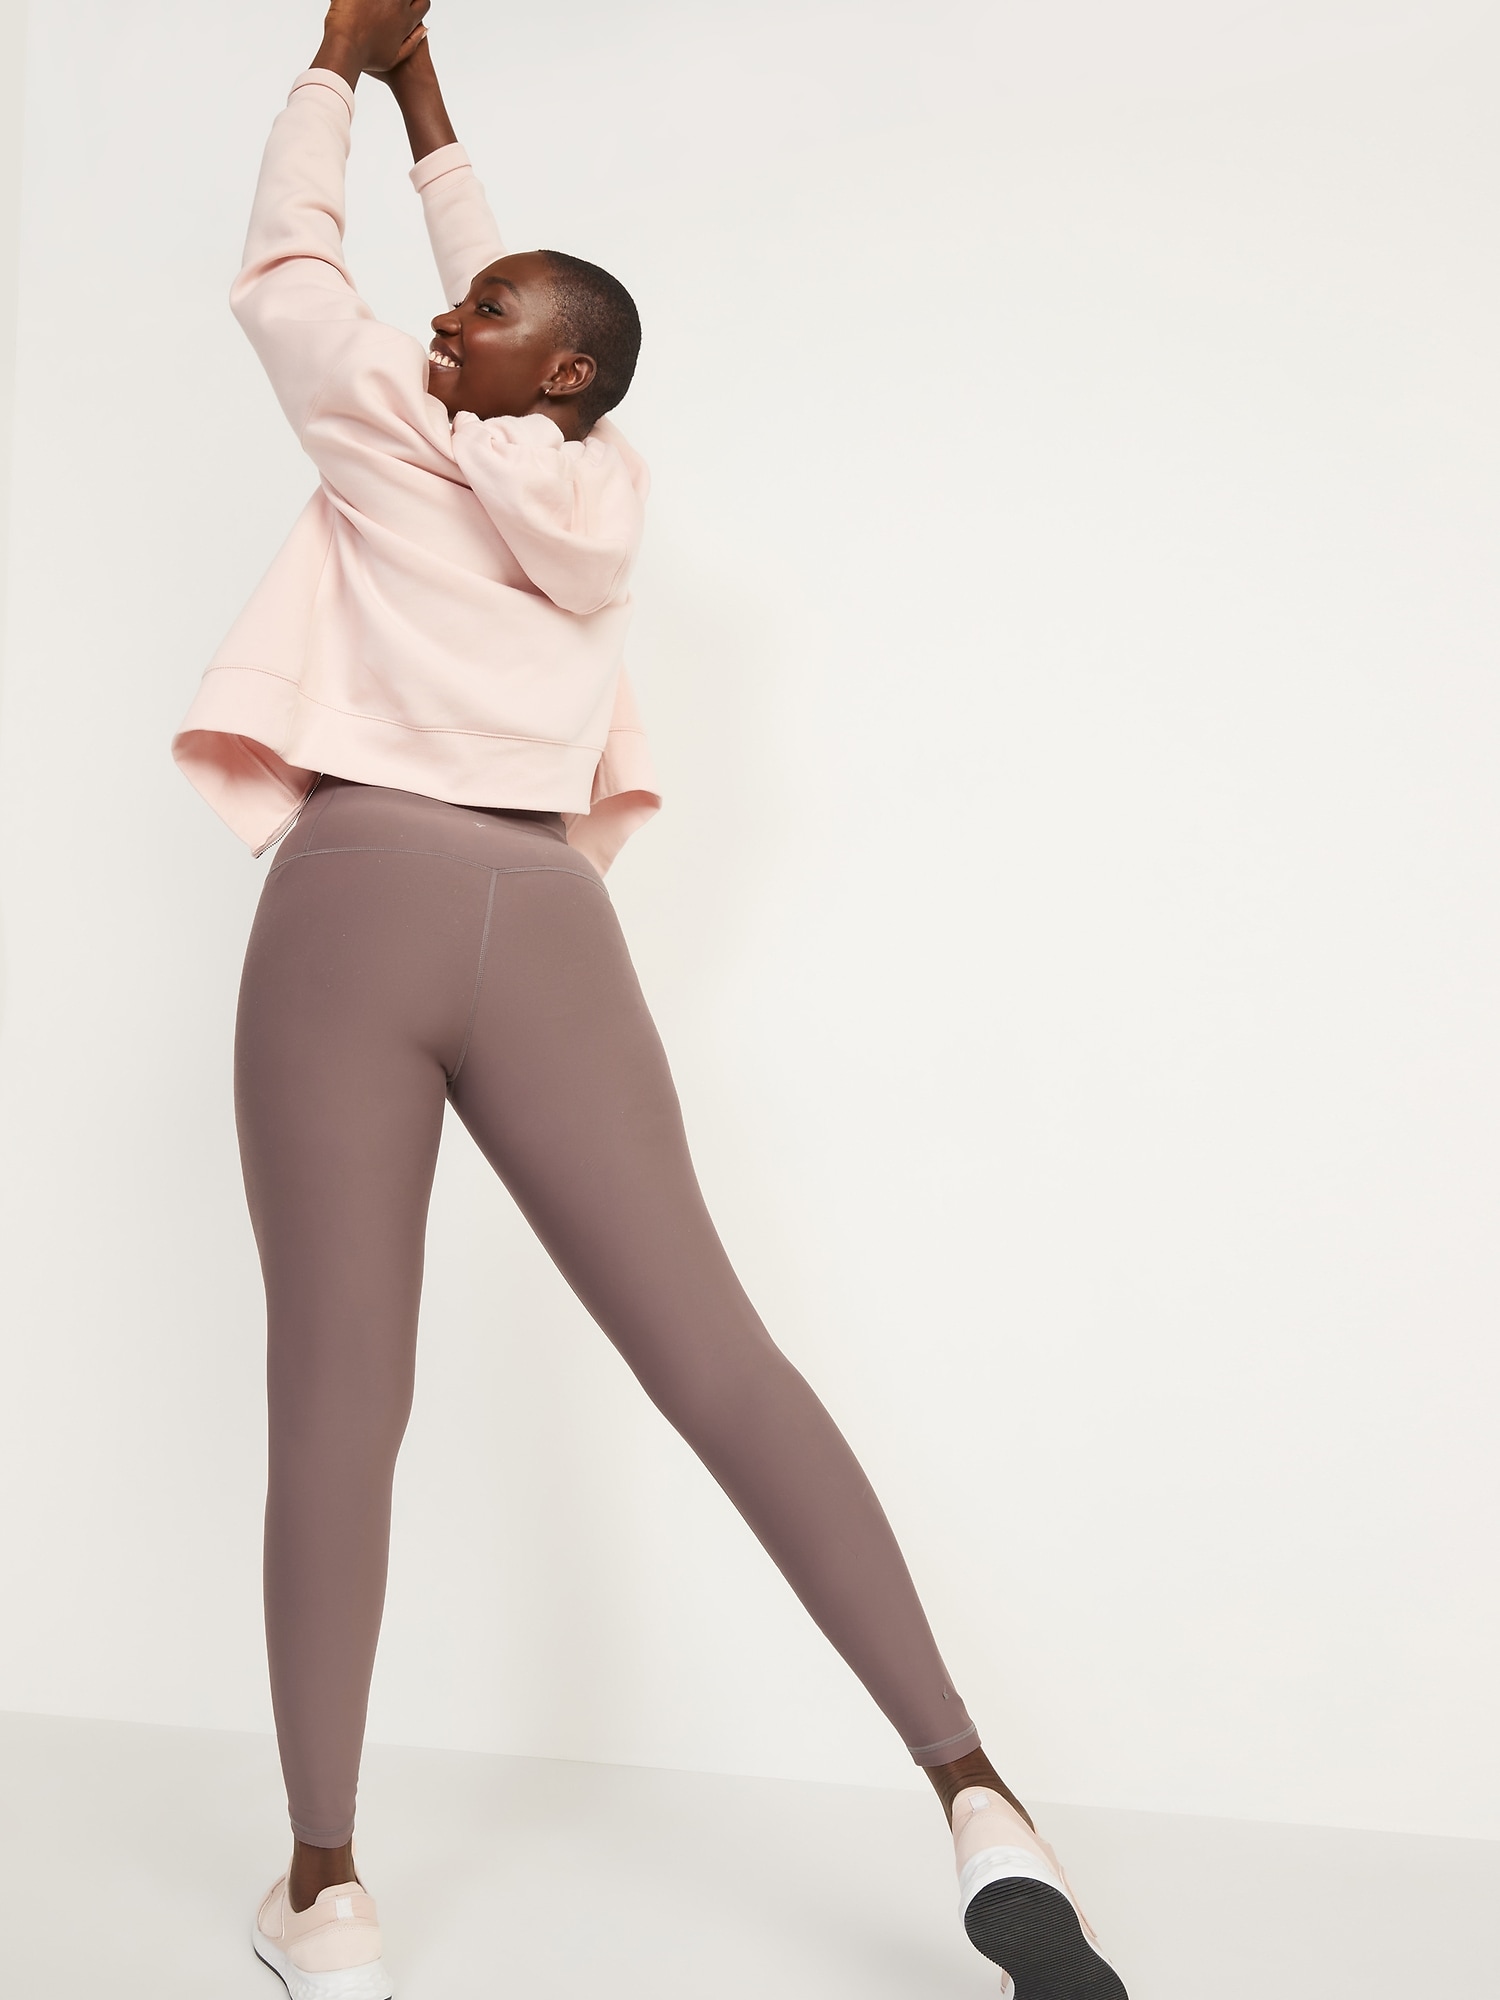 Extra High-Waisted PowerSoft Leggings